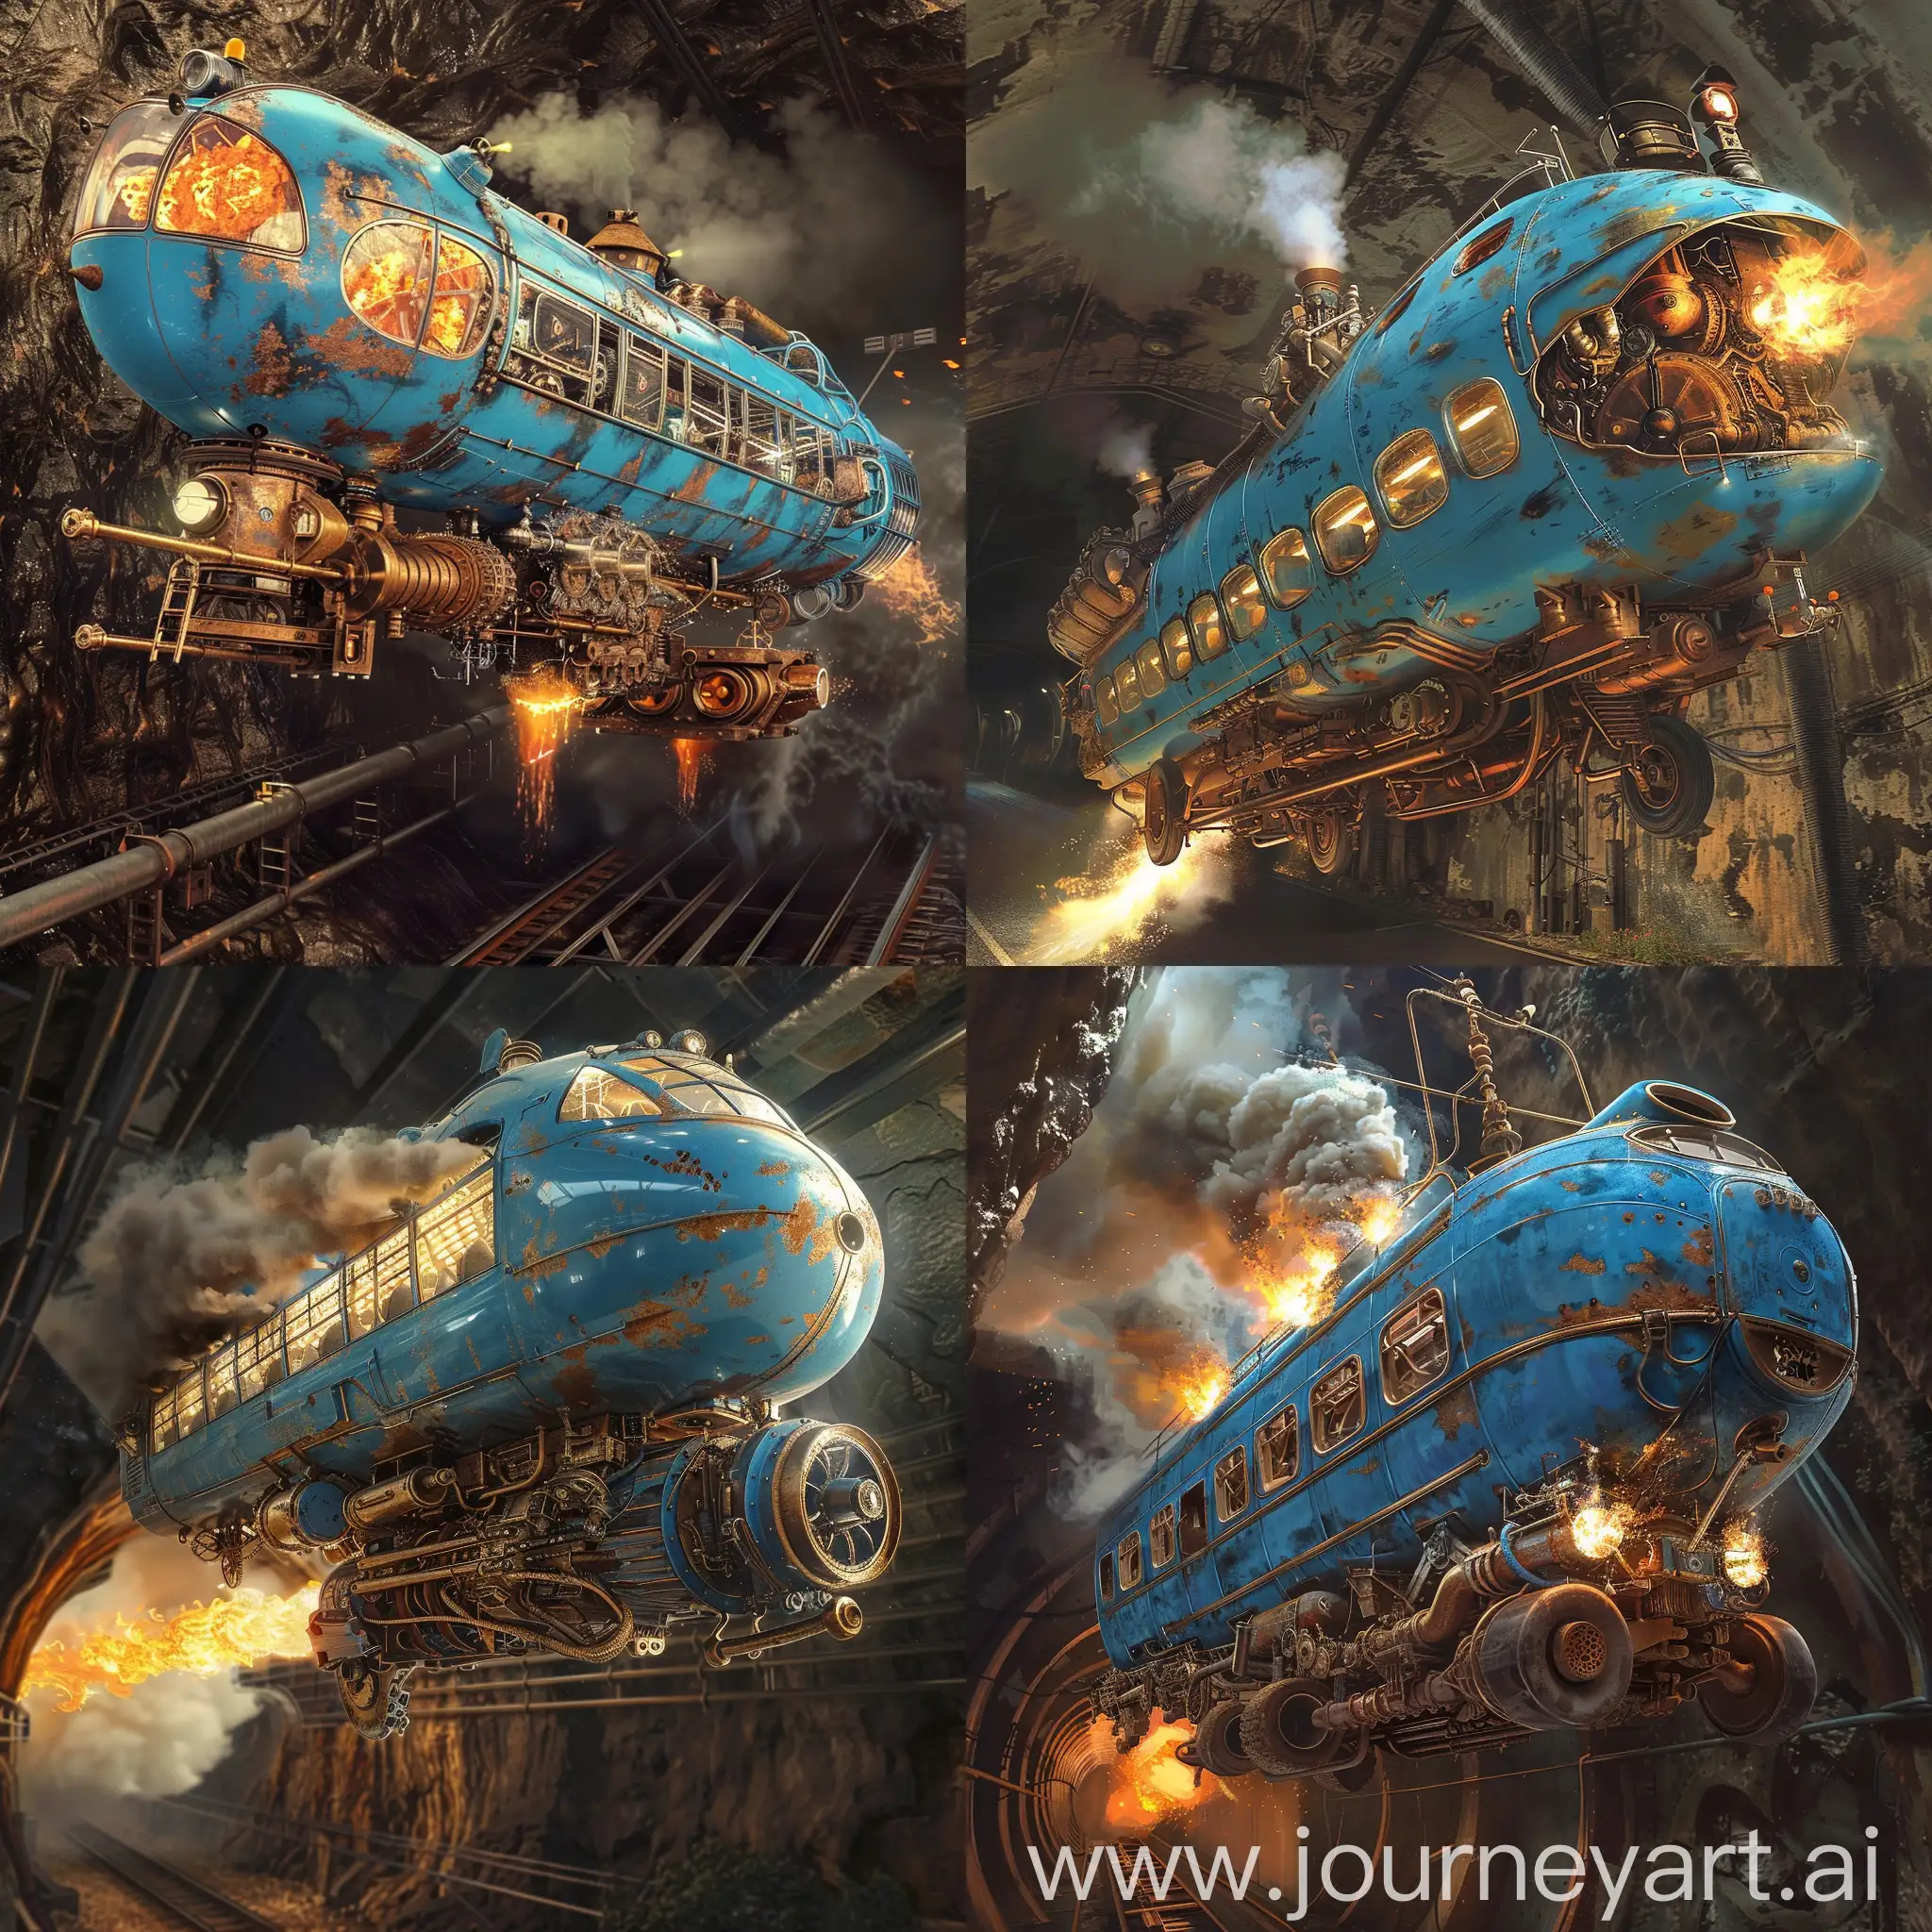 A blue rocket like a bus, hovering in the air, with a huge steam engine, fire and smoke coming out of the engine,in the tunnel,rusted,intricate body,extremely detailed,powerful,natural light,steampunk.